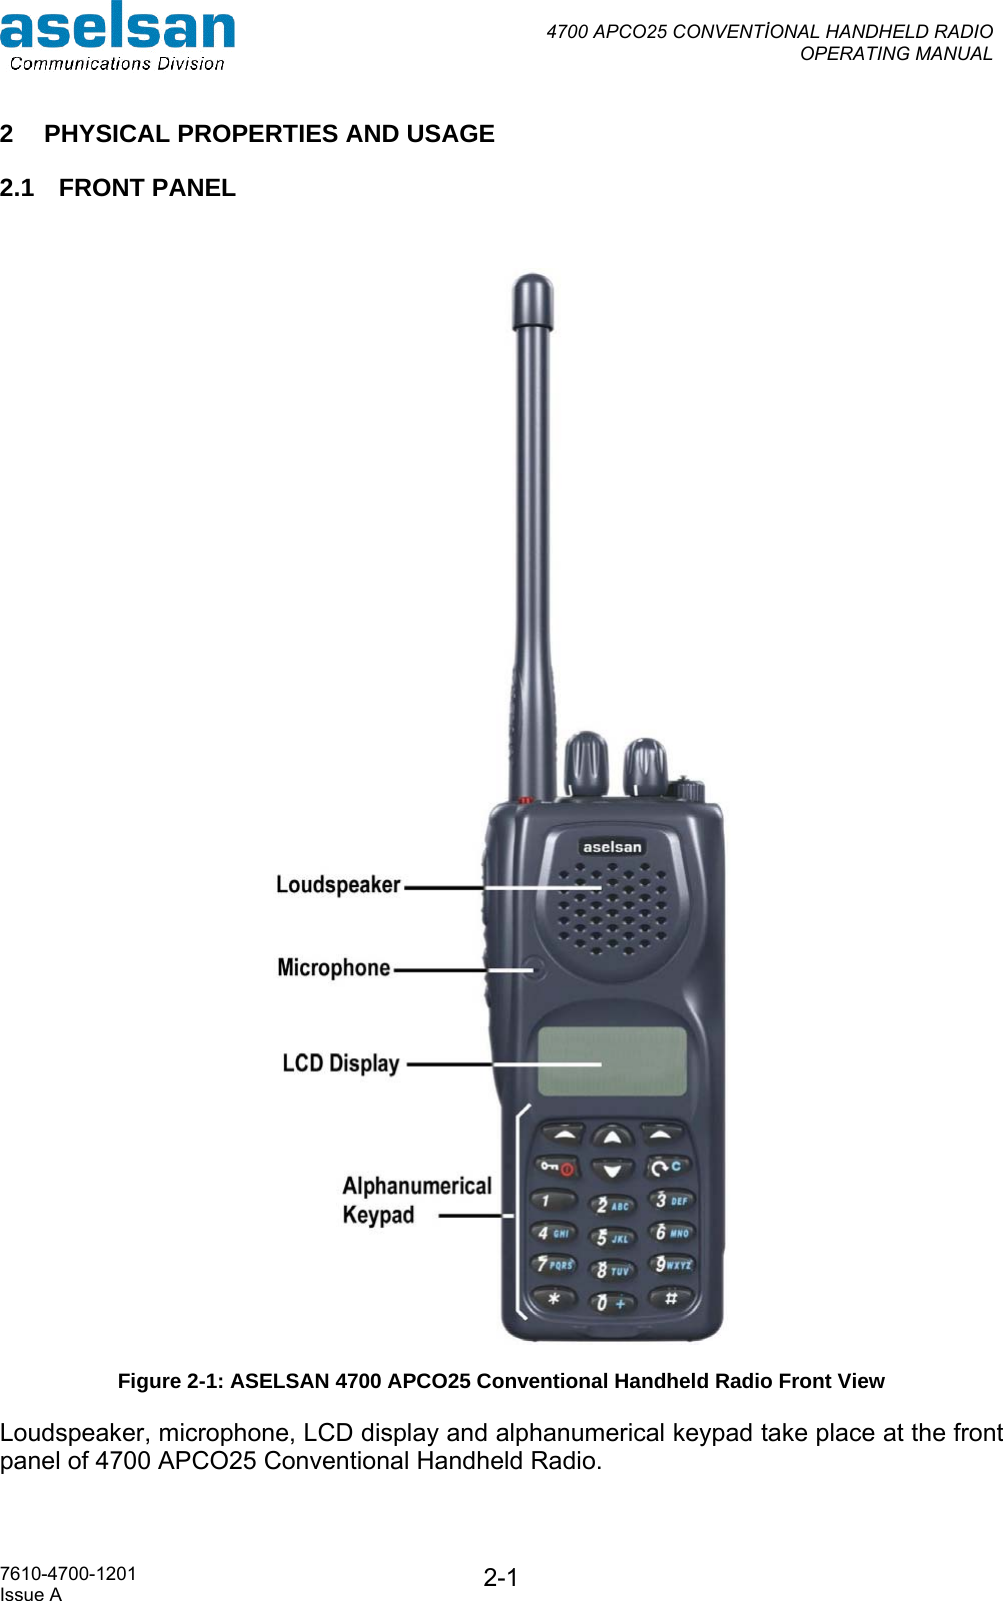  4700 APCO25 CONVENTİONAL HANDHELD RADIO  OPERATING MANUAL   7610-4700-1201 Issue A  2-12  PHYSICAL PROPERTIES AND USAGE 2.1 FRONT PANEL   Figure 2-1: ASELSAN 4700 APCO25 Conventional Handheld Radio Front View Loudspeaker, microphone, LCD display and alphanumerical keypad take place at the front panel of 4700 APCO25 Conventional Handheld Radio.  